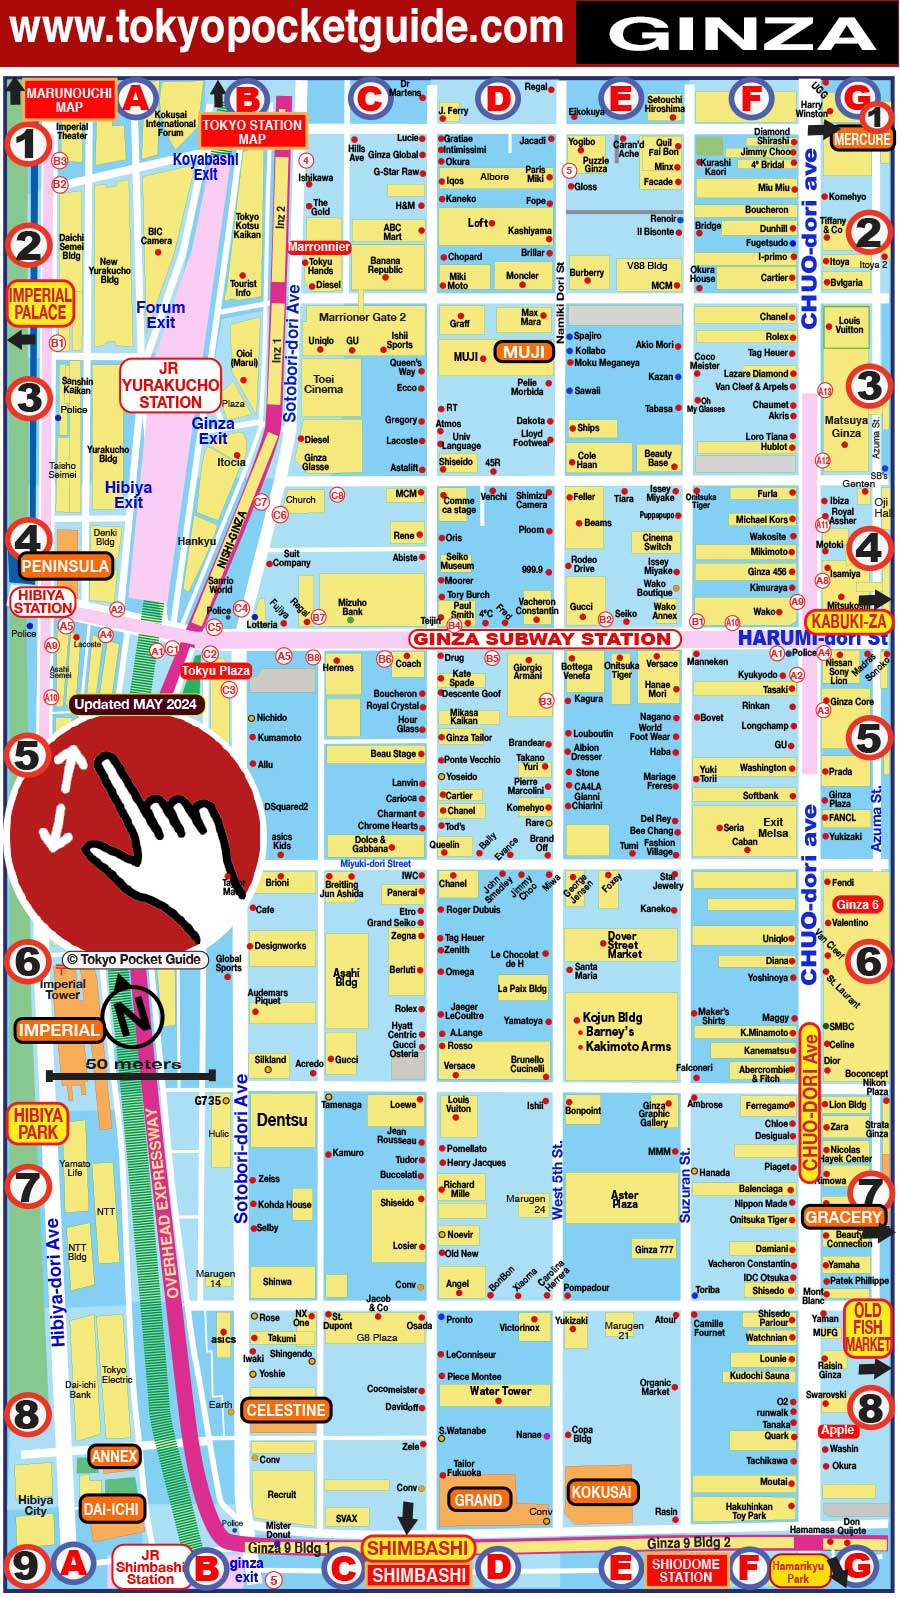 Tokyo Pocket Guide Ginza Map In English For Shopping And Stores